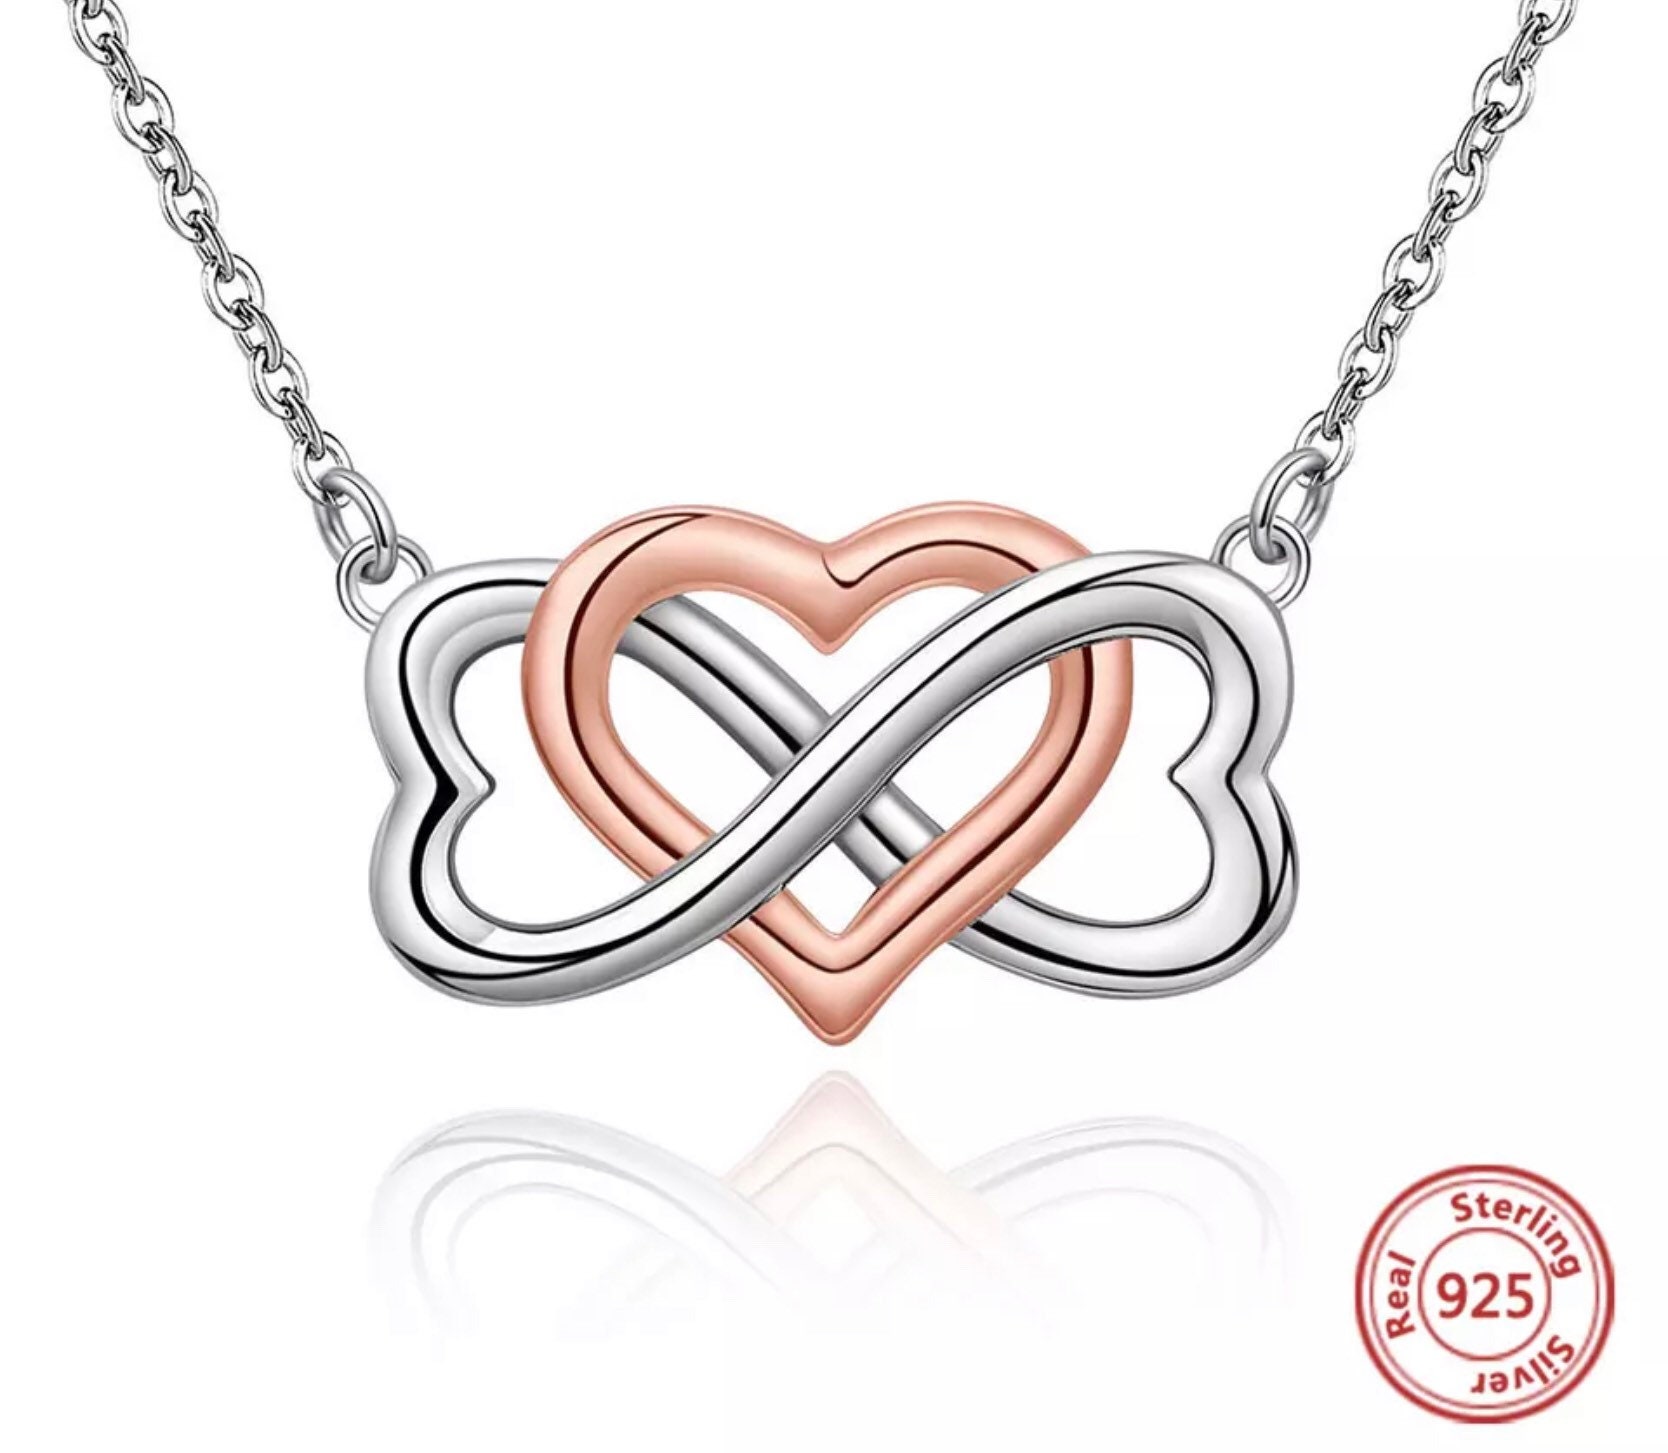 18kt Gold over Silver Clear Crystal Infinity/Heart Necklace - Walmart.com